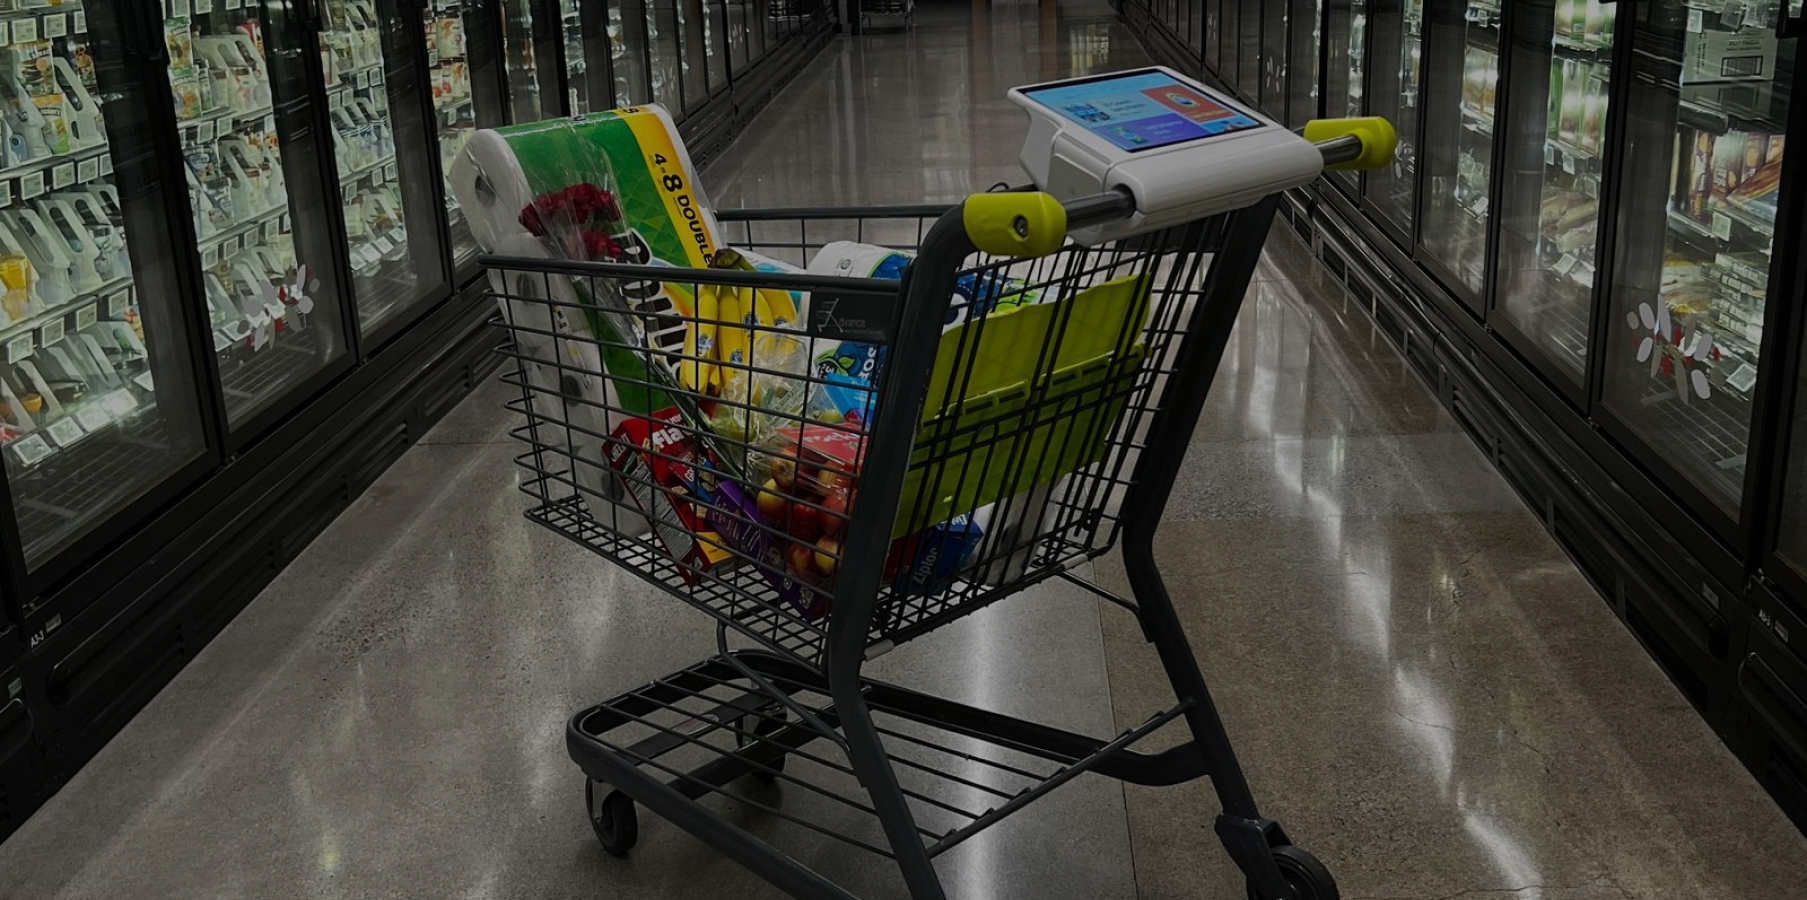 Smart cart maker Veeve shifts gears from checkout to retail media